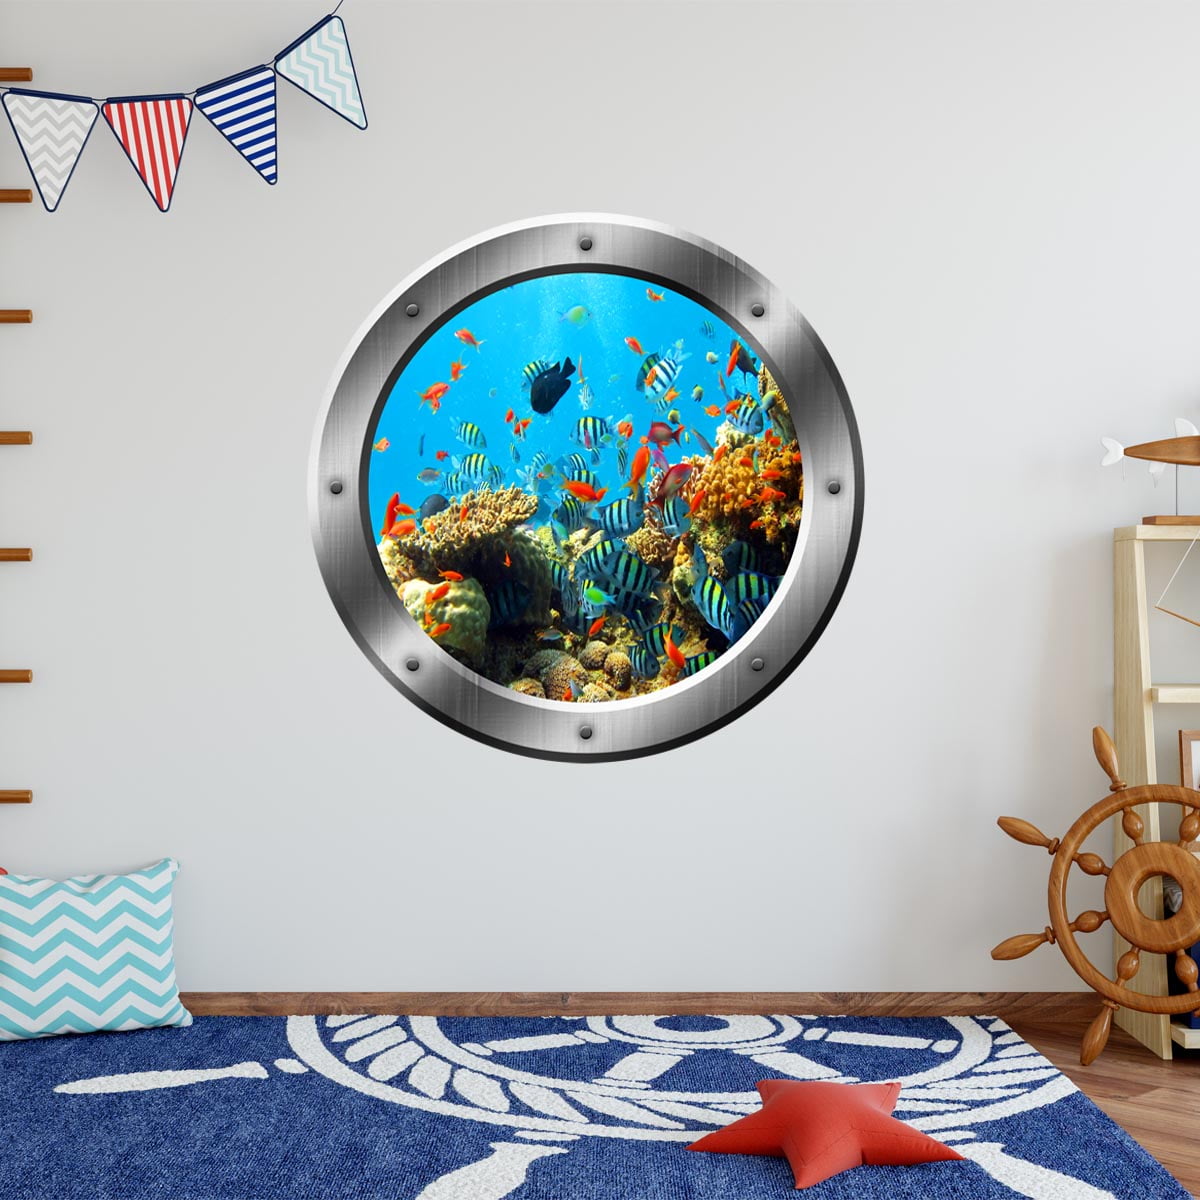 Porthole Stickers 3 Pcs Ocean World Wall Stickers Bathroom Wall Art Sea Stickers Porthole Window Sticker Wall Stickers & Murals Wall Art for Bathroom 3D Under The Sea Nature Scenery Wall Decals